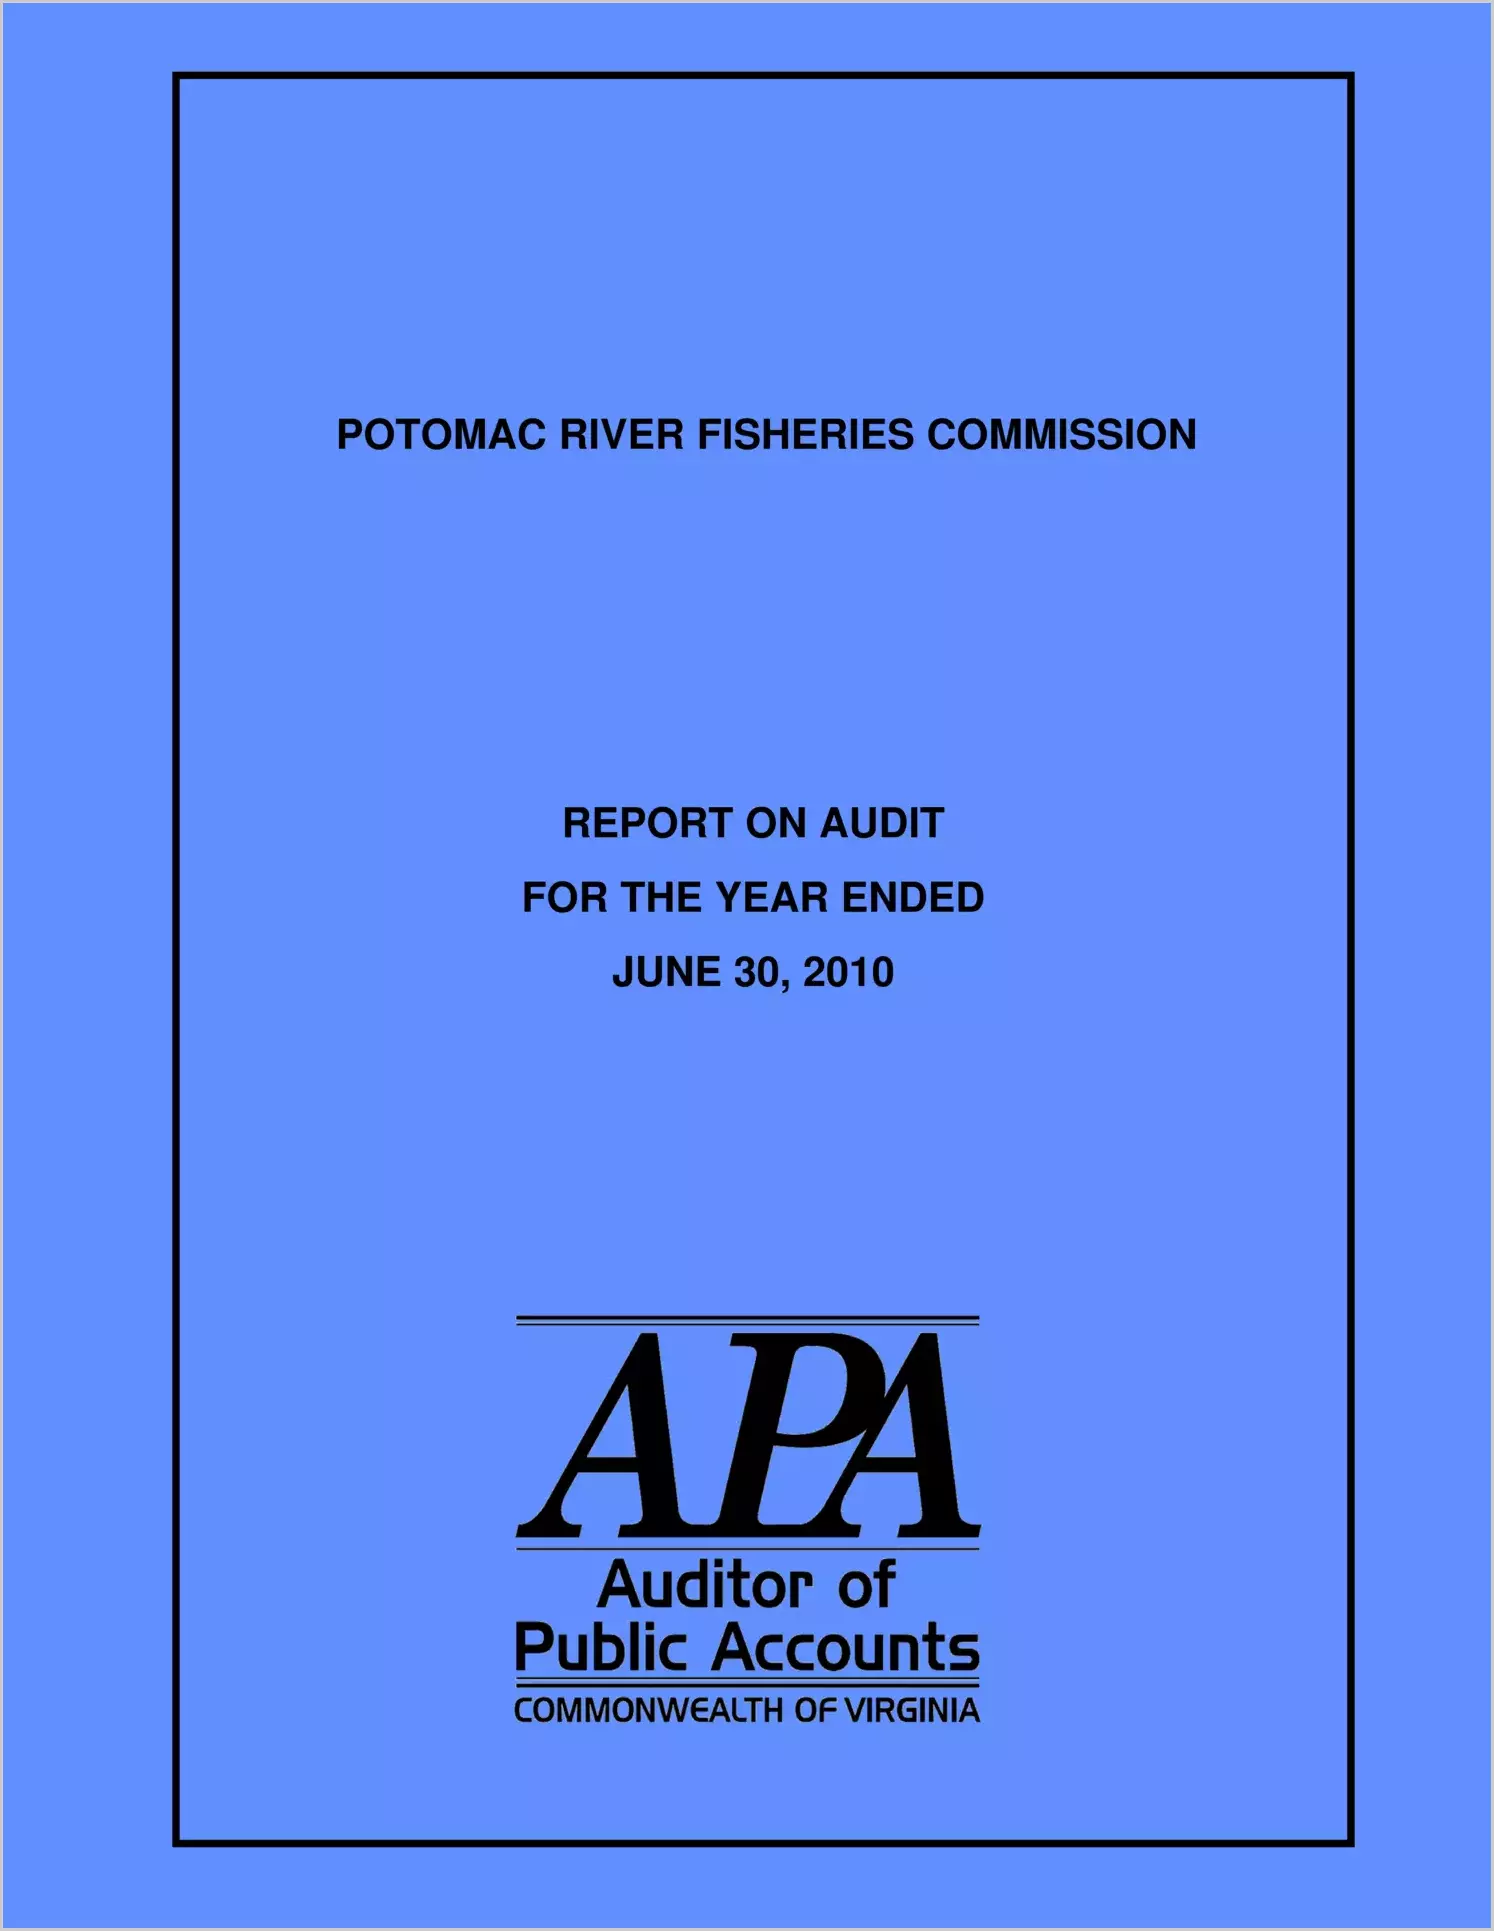 Potomac River Fisheries Commission report on audit for the year ended June 30, 2010